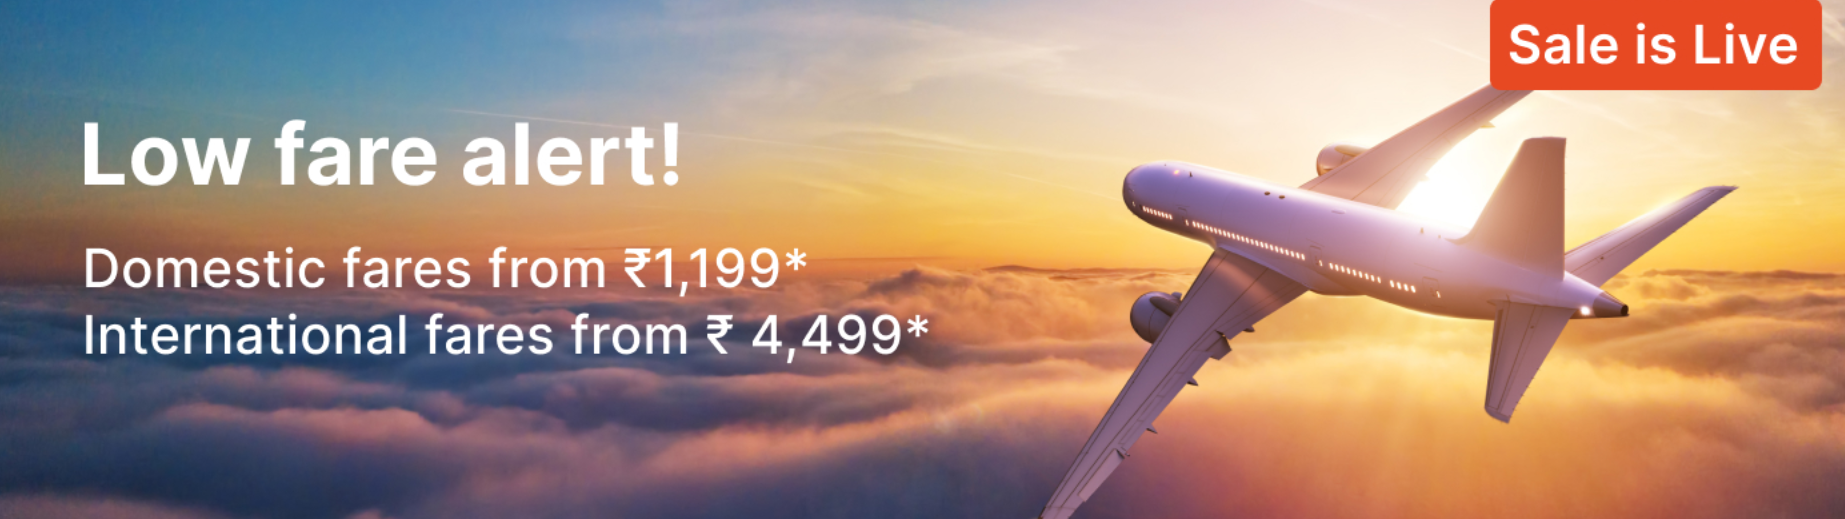 Cleartrip - Cleartrip Flights : Upto 75% OFF